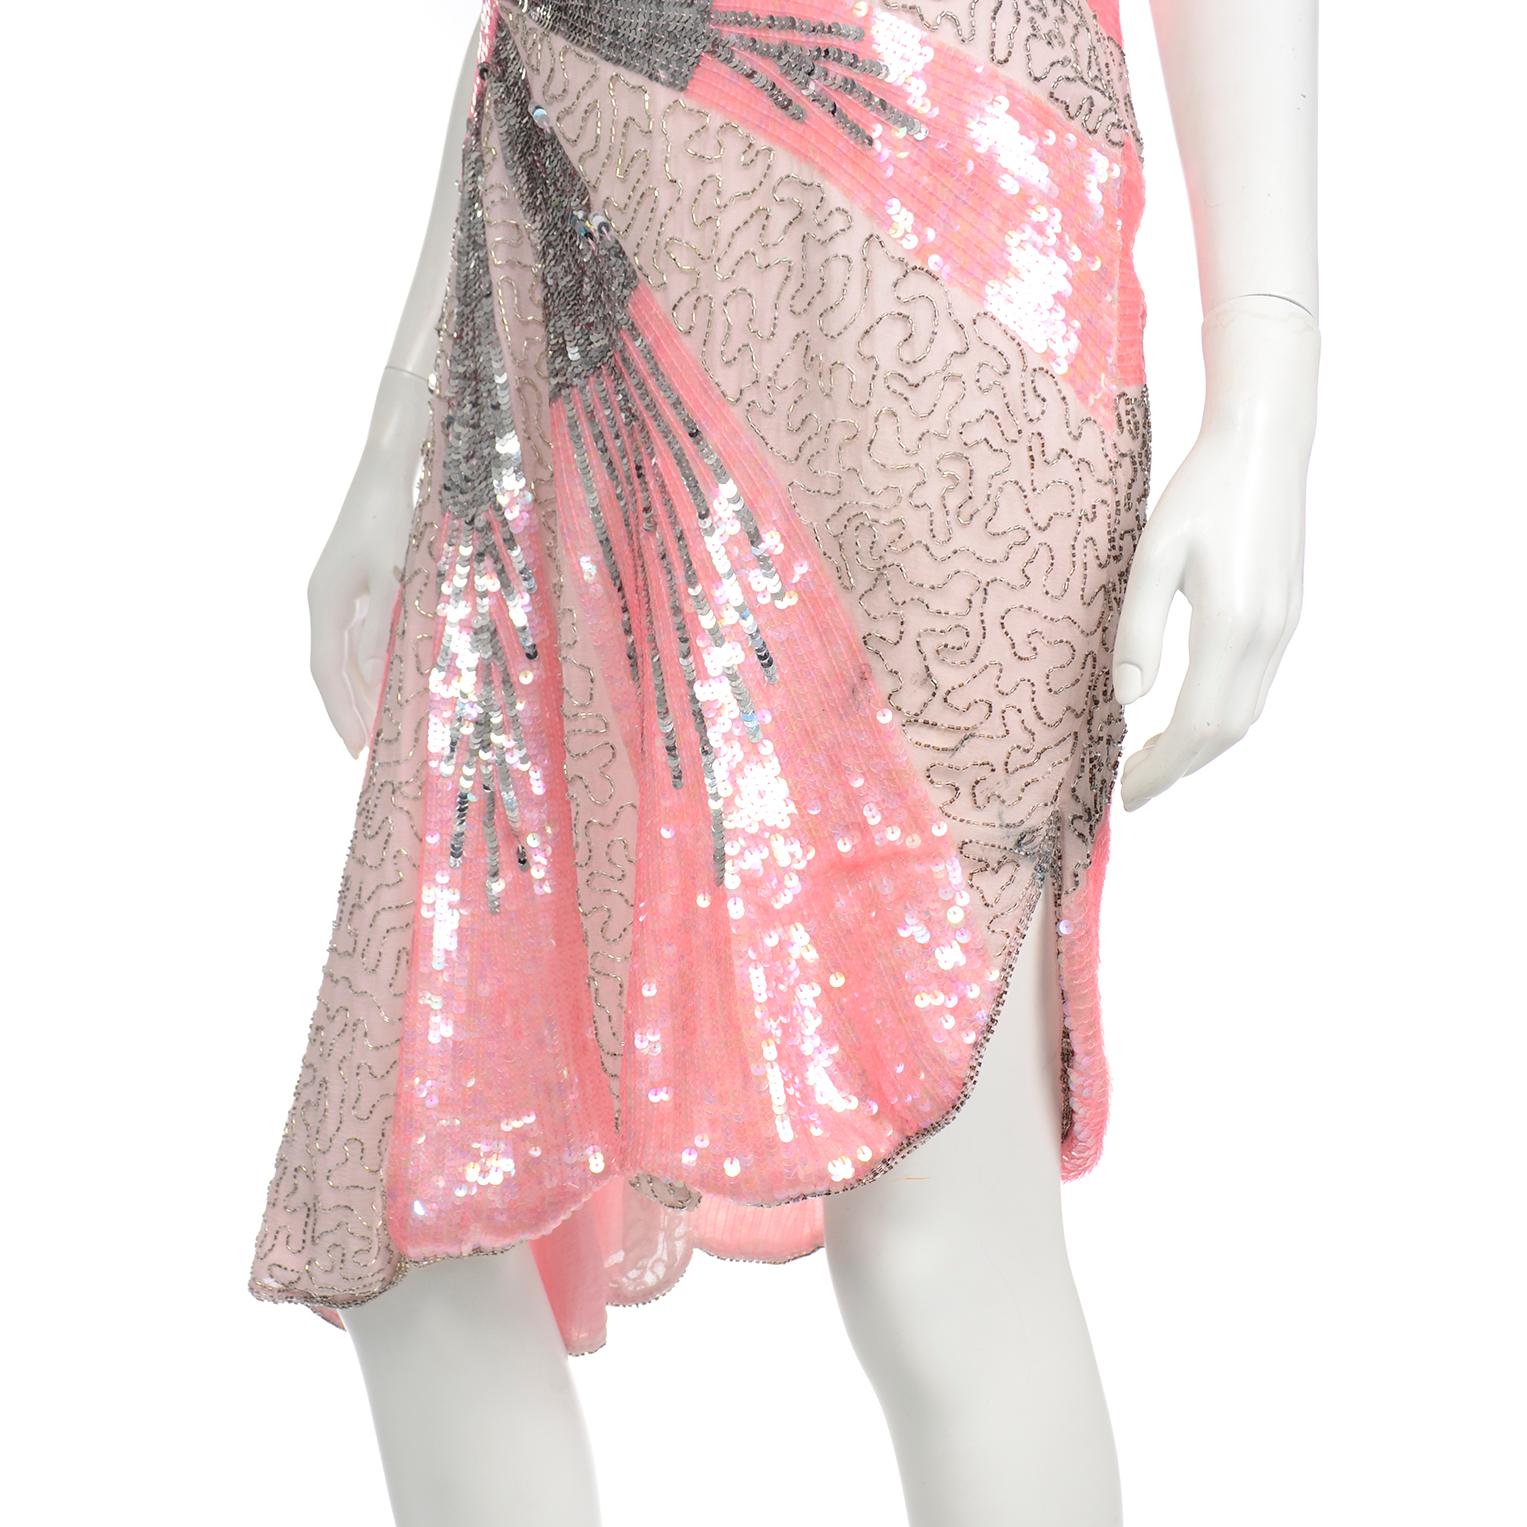 Unworn Vintage Pink & Silver 1920's Style Silk Evening Dress w Beads & Sequins In New Condition For Sale In Portland, OR